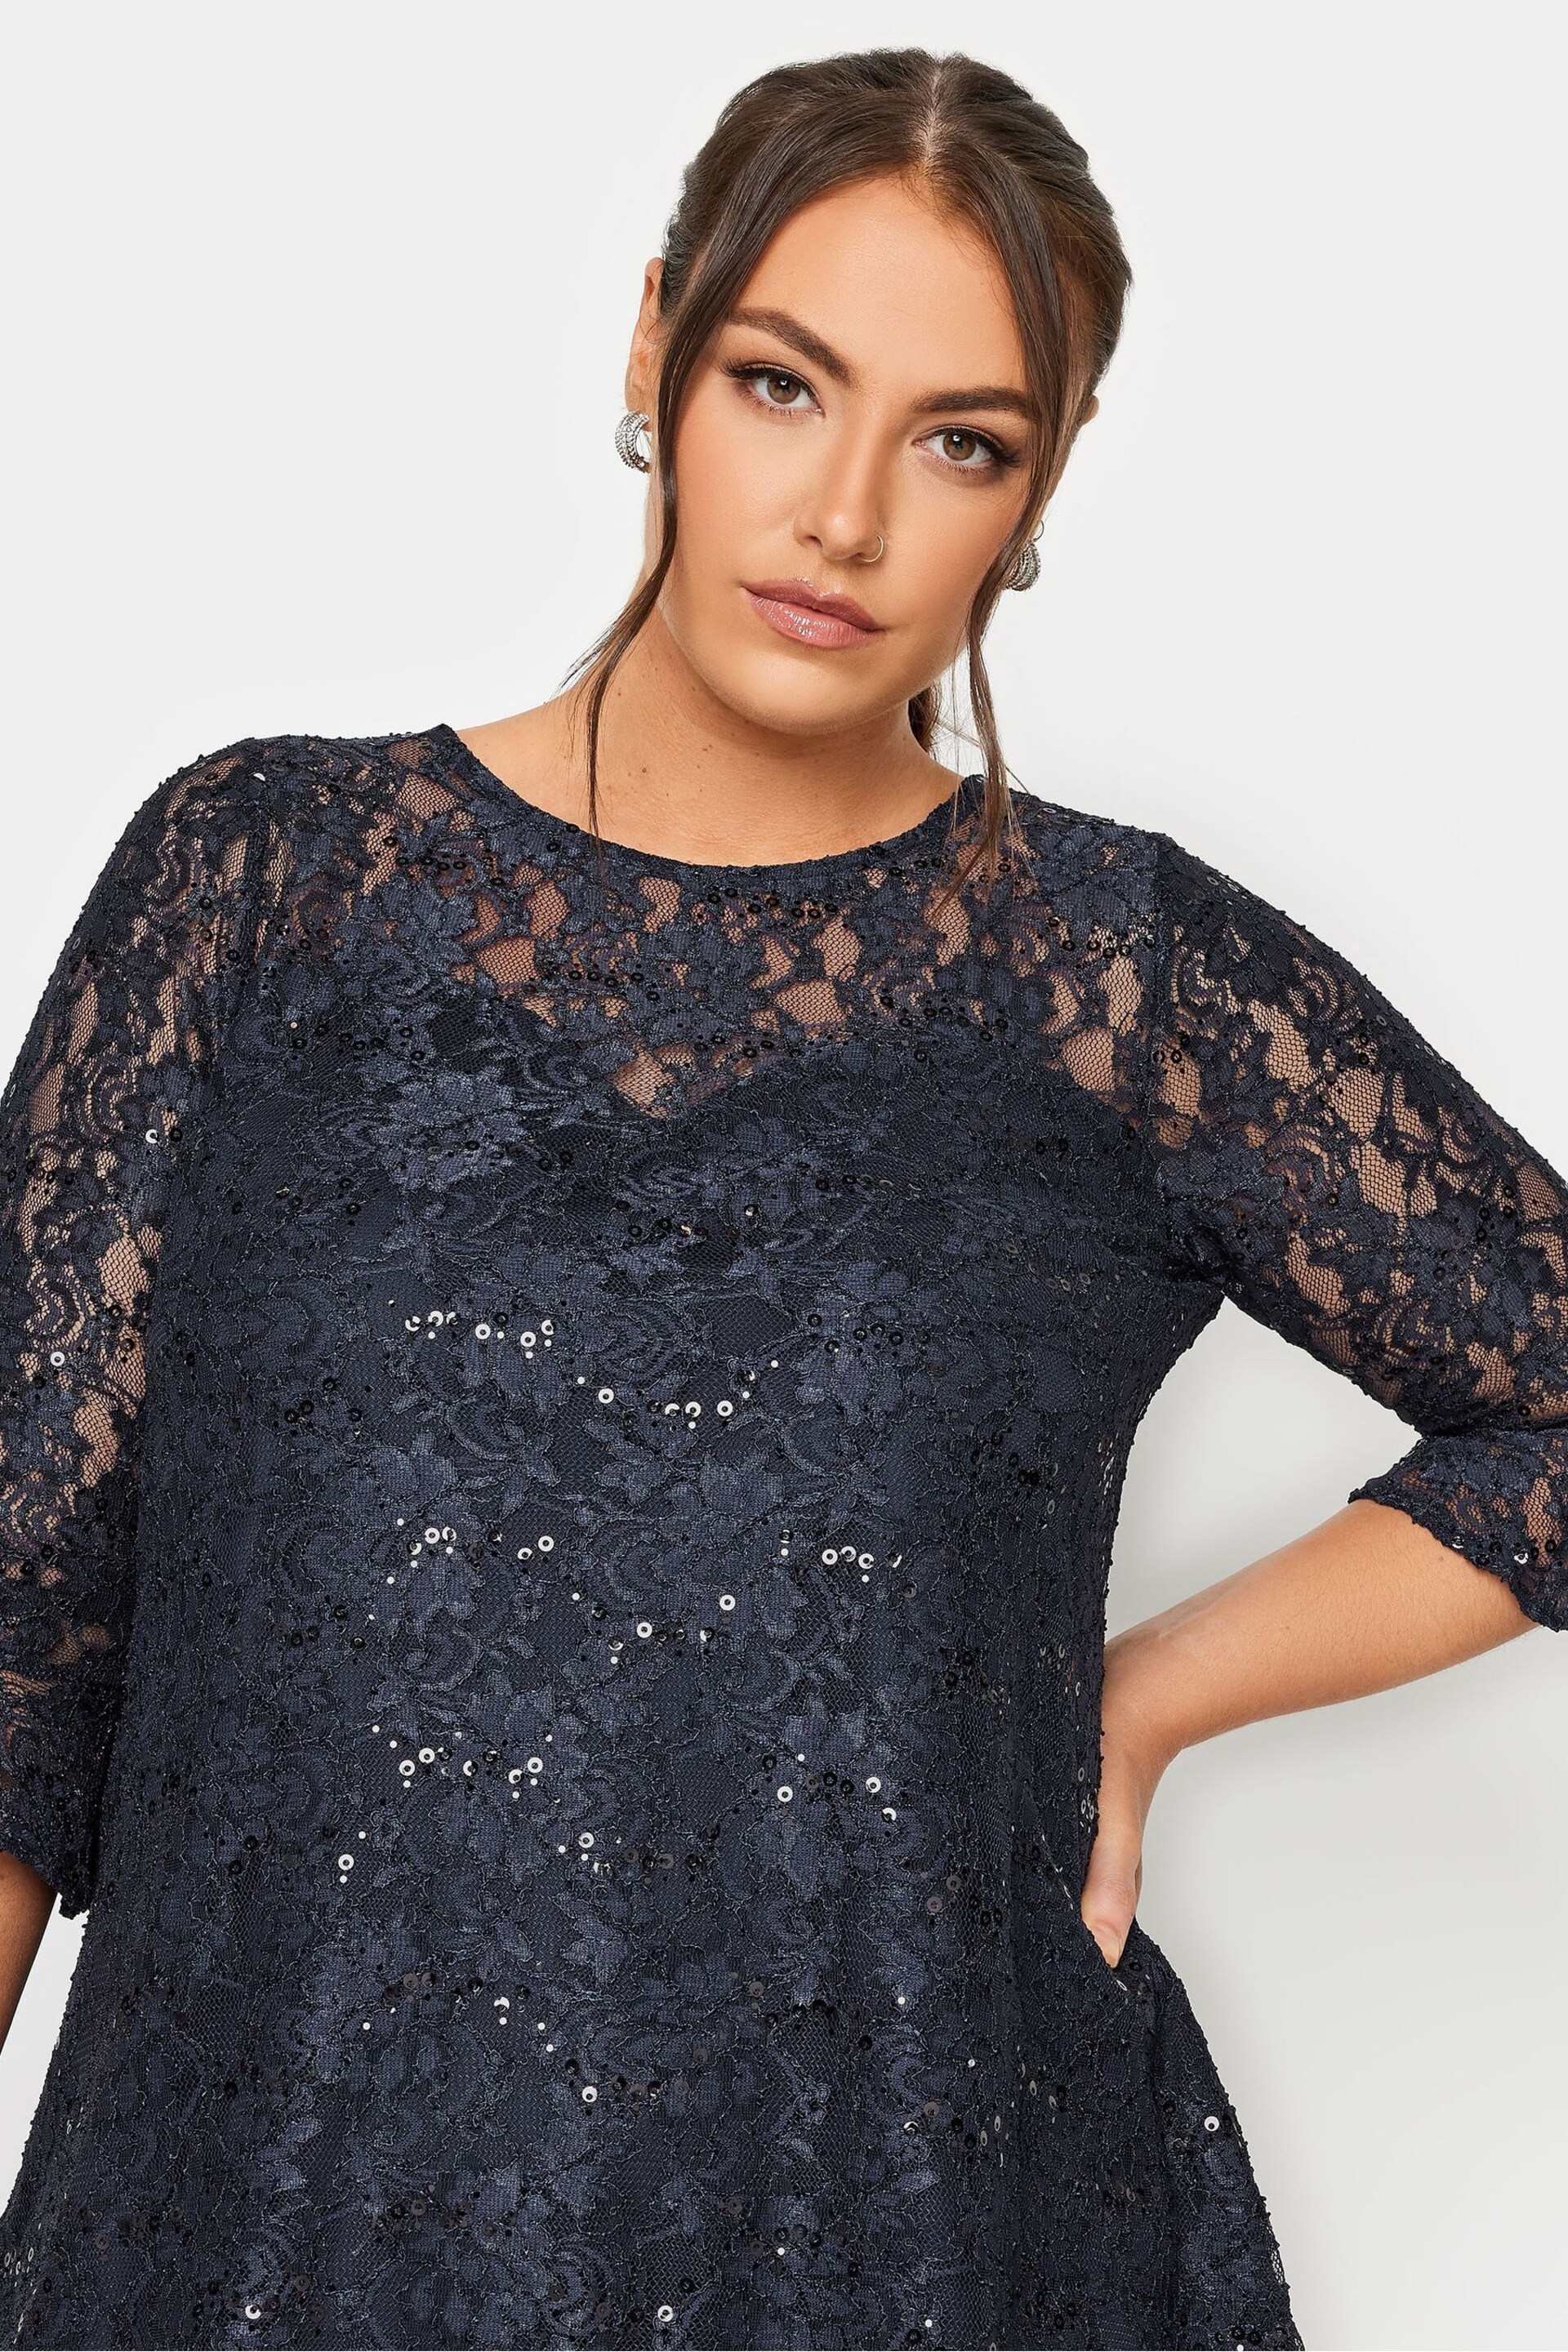 Yours Curve Blue Sweetheart Neck Lace Party Swing Top - Image 4 of 4